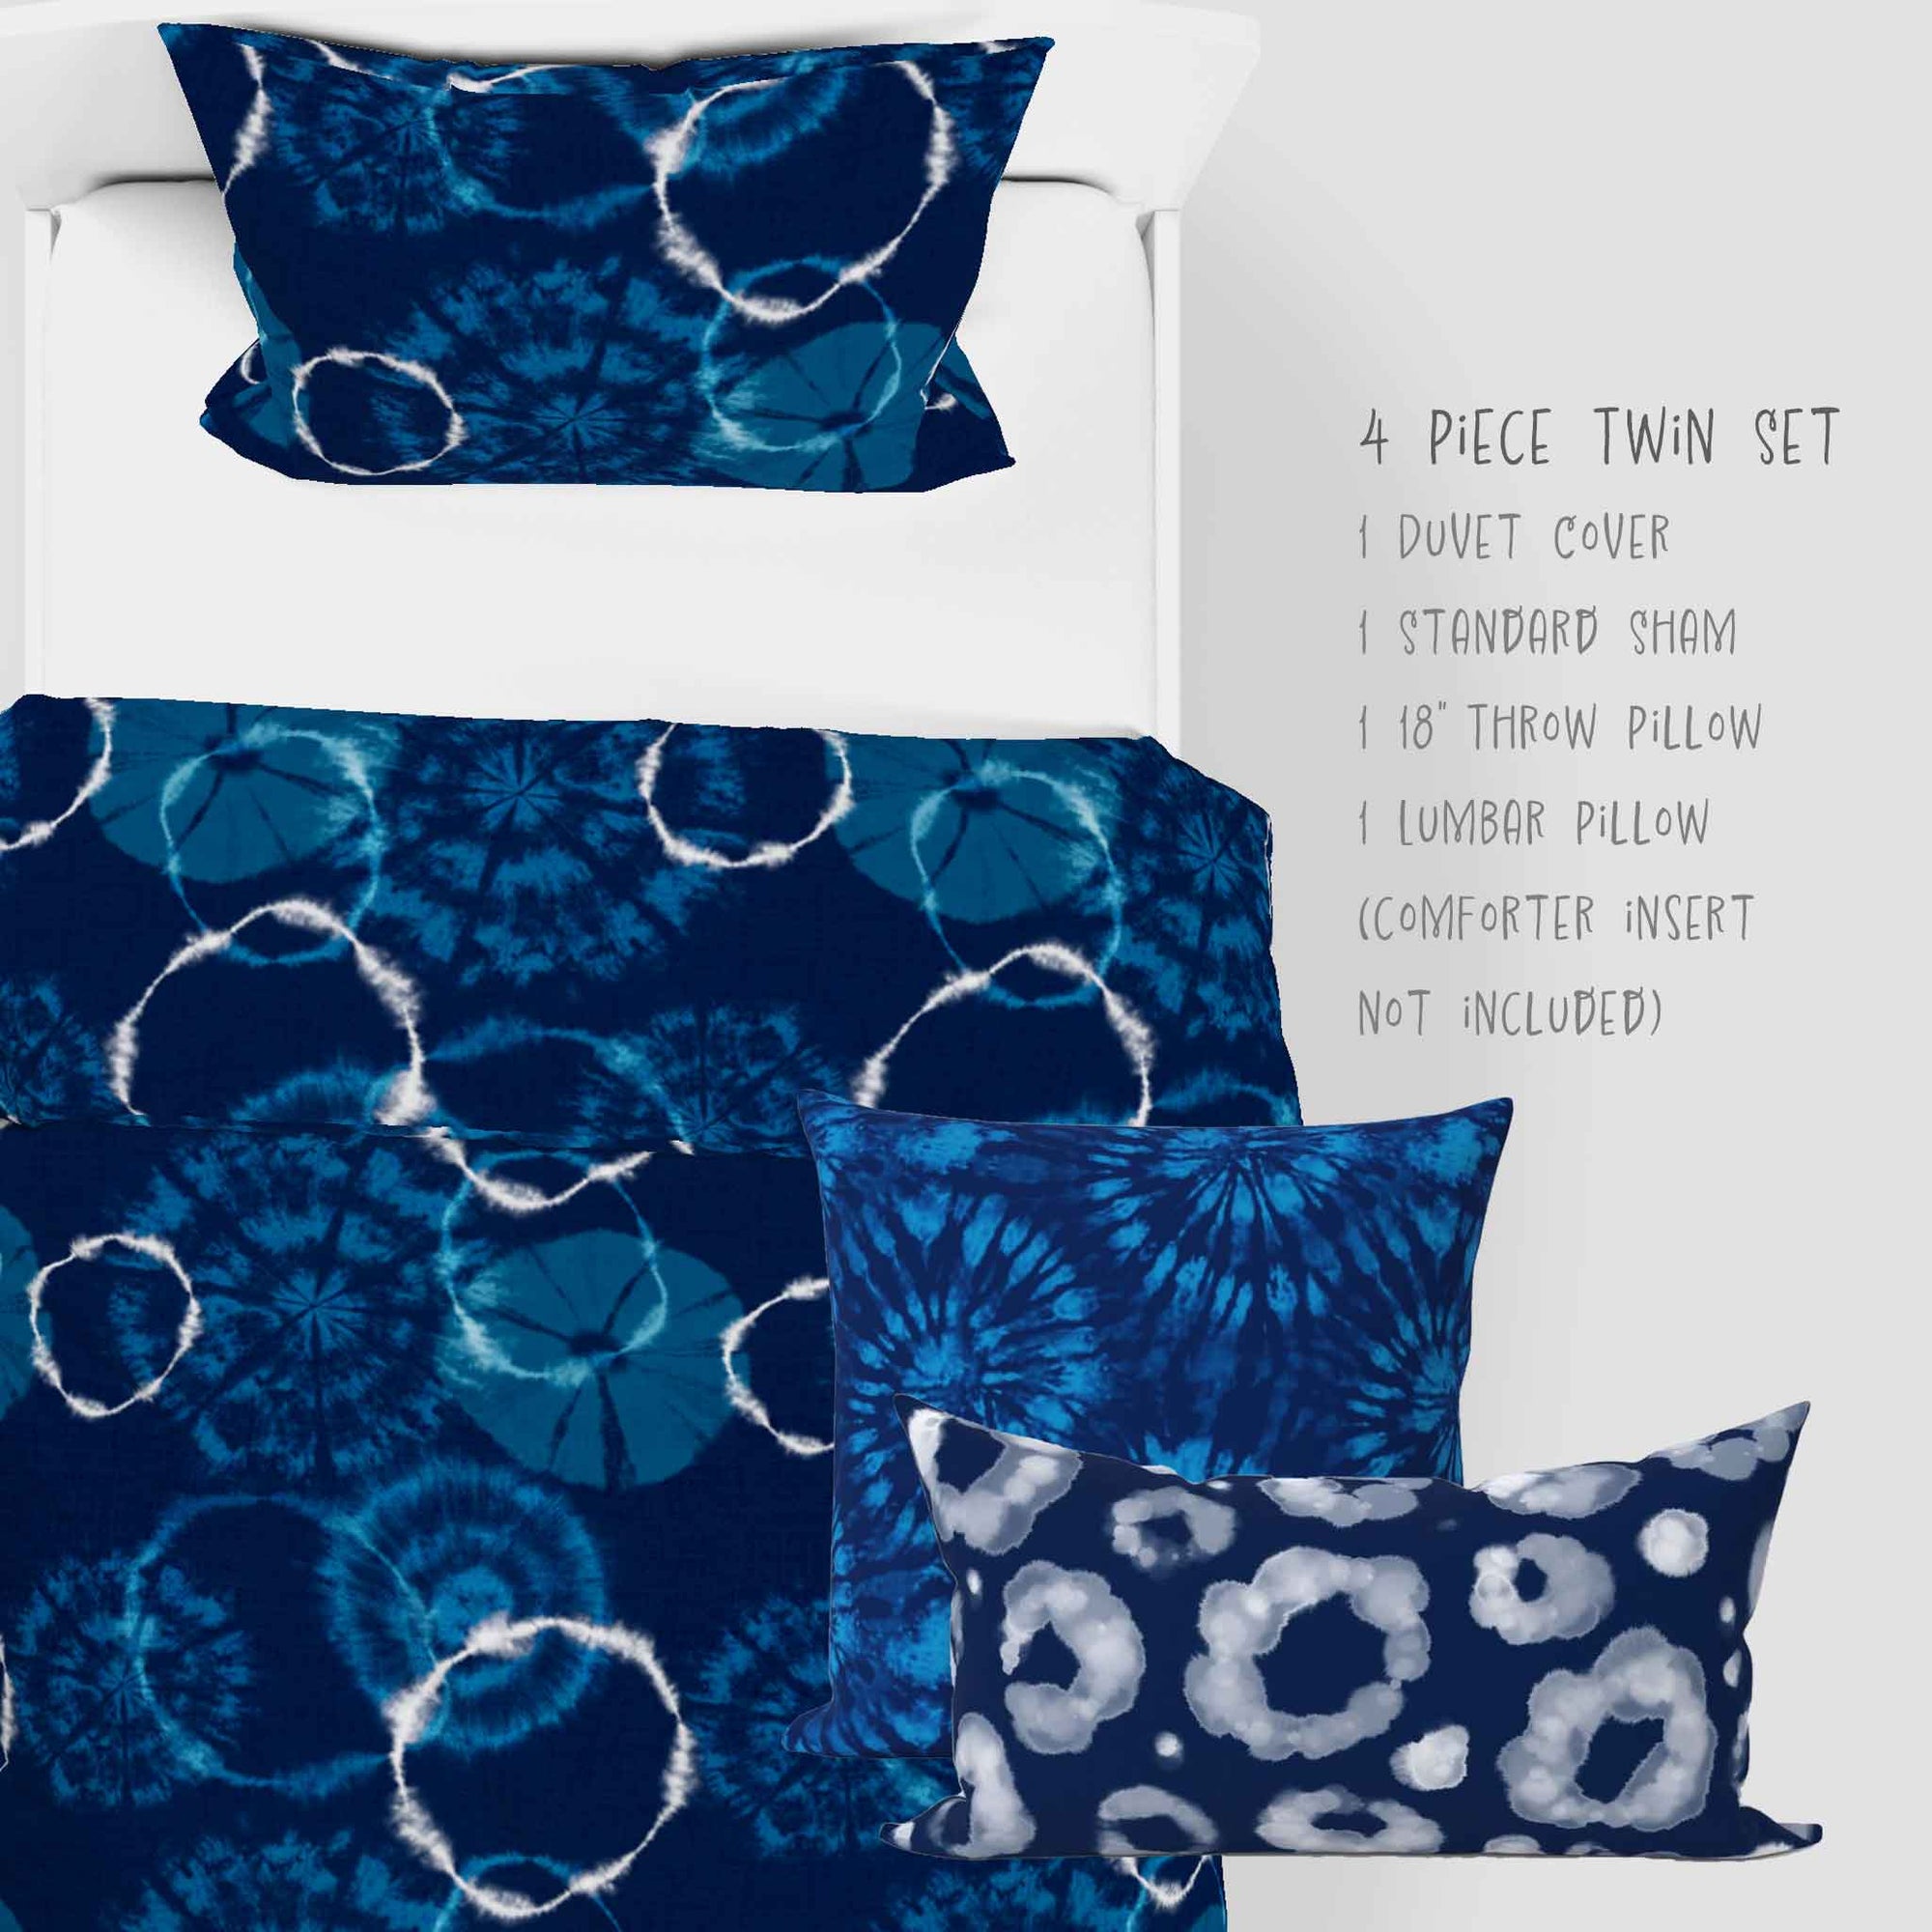 4 piece Shibori Indigo Tie Dye Dream pattern. Available in twin size. Your order arrives with duvet cover, one sham, one 18 inch throw pillow and one lumbar pillow.